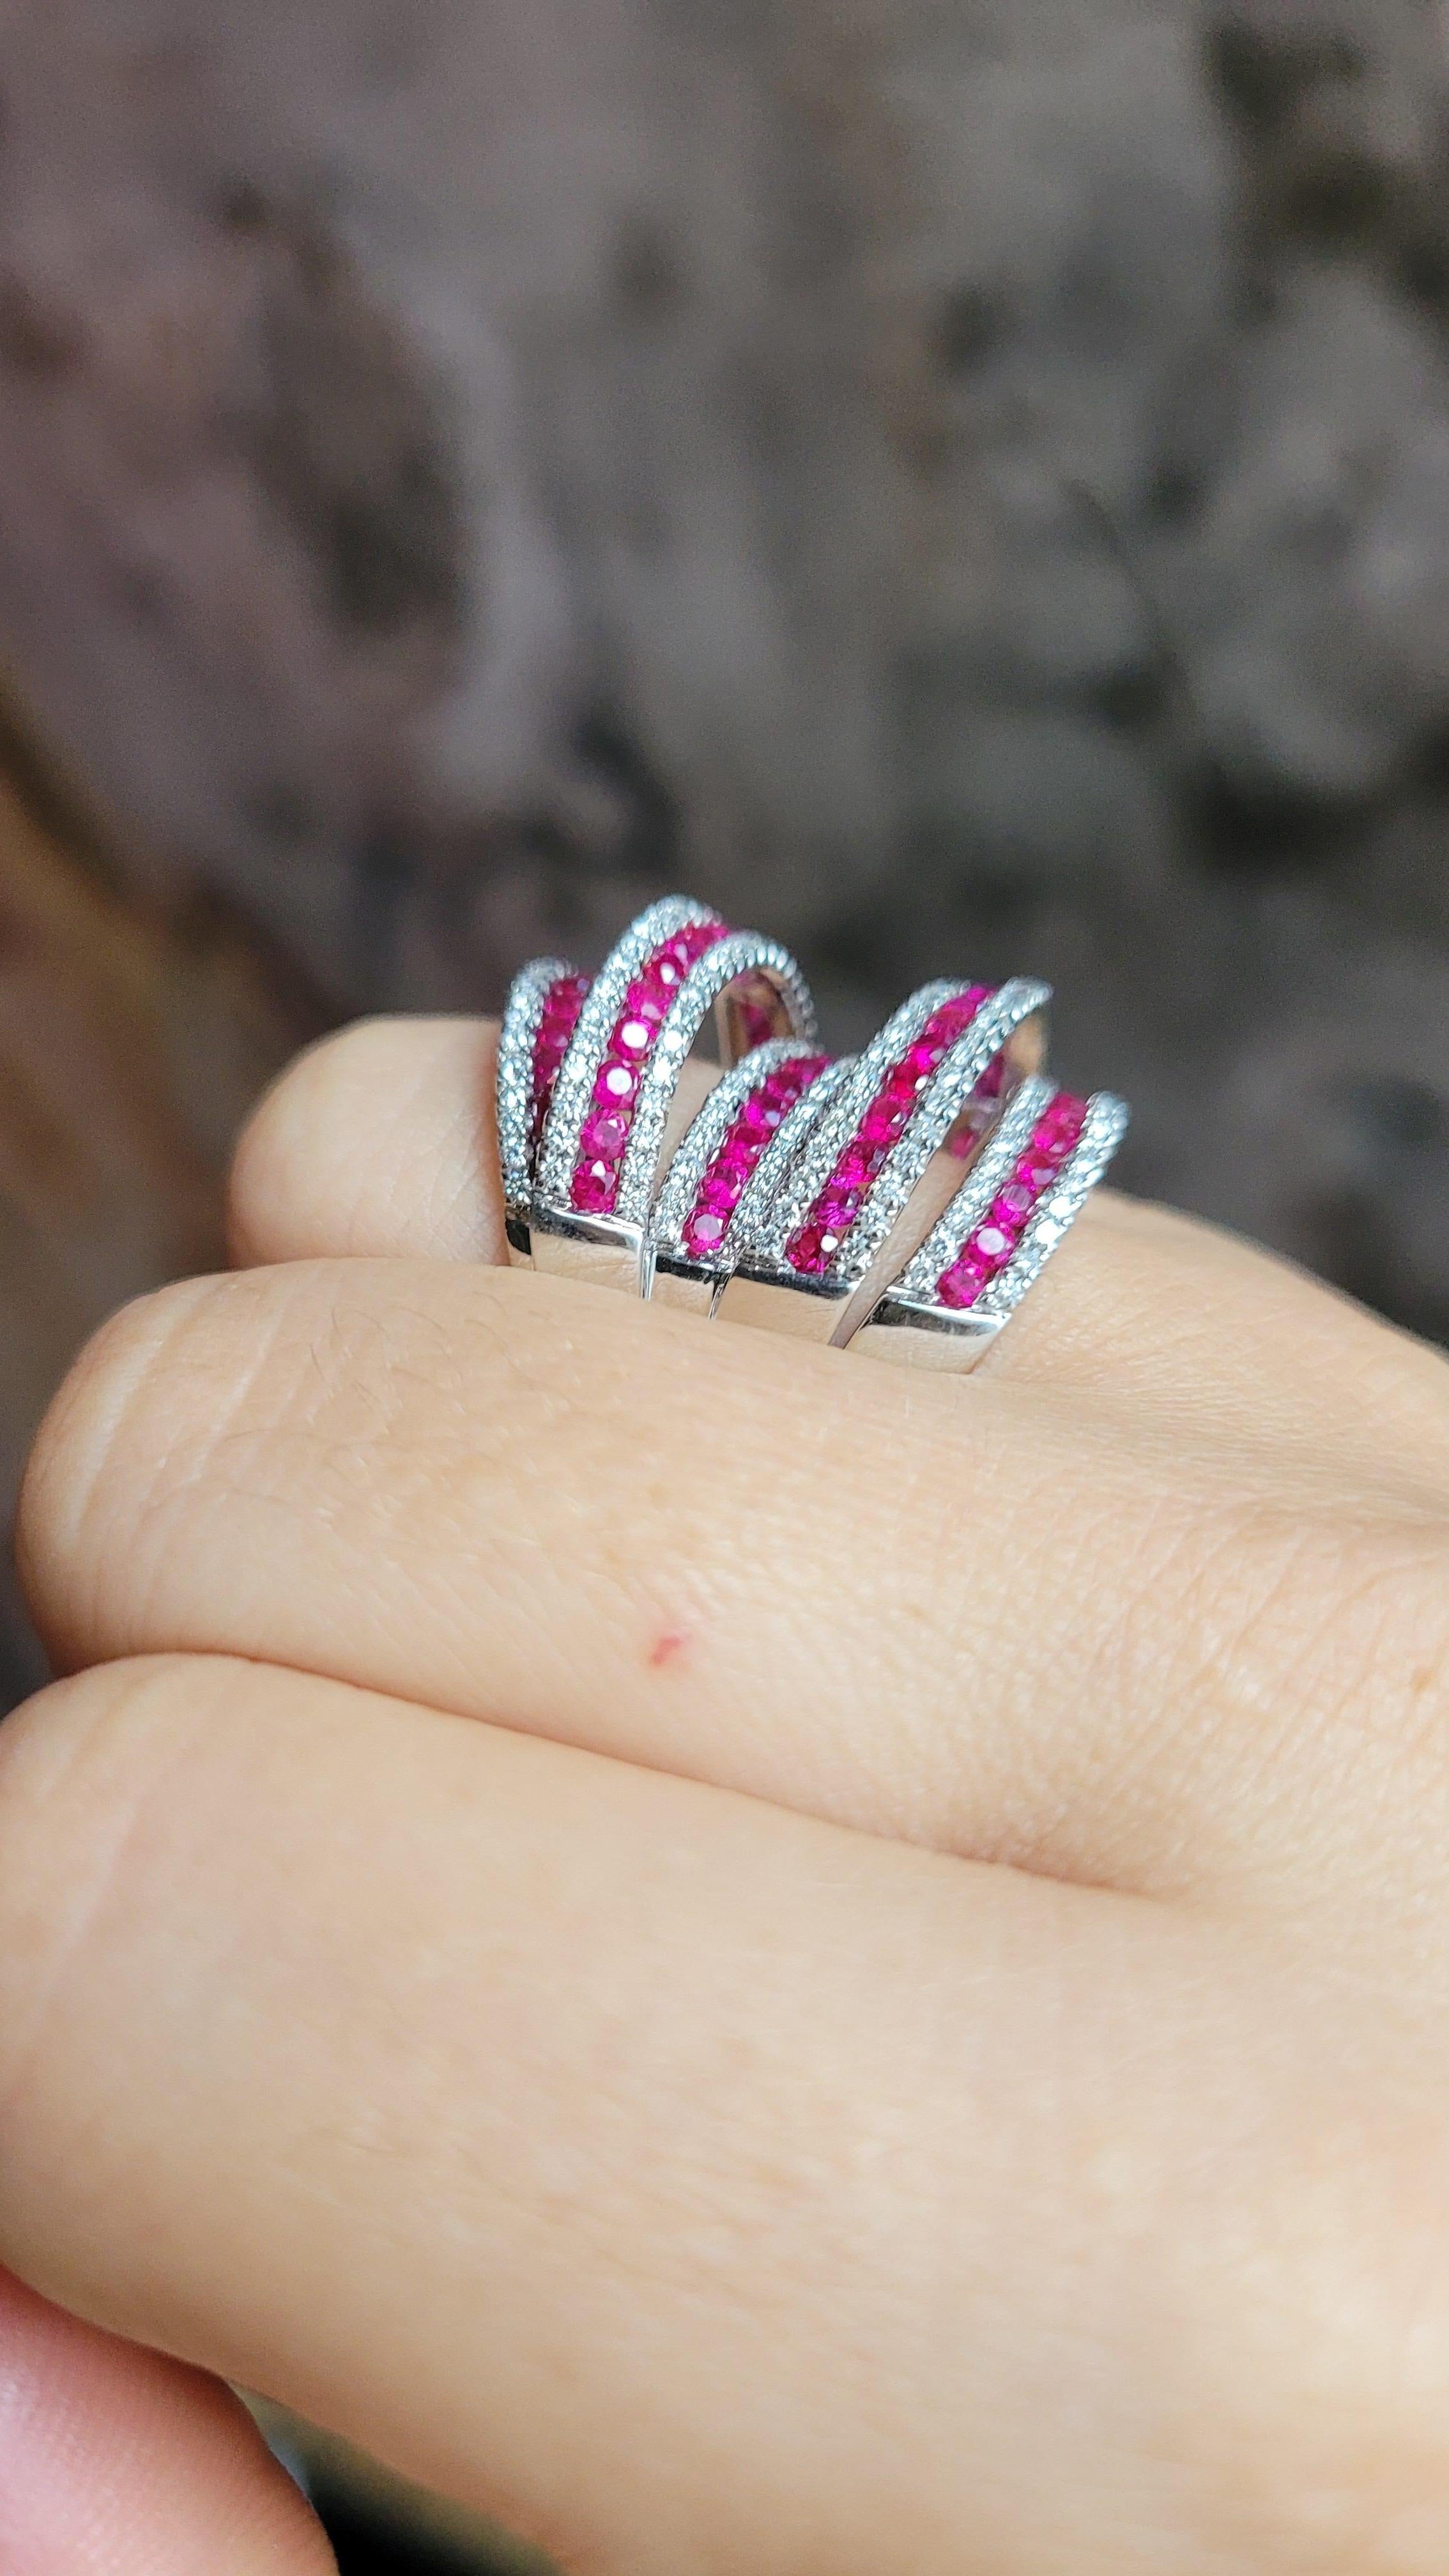 18K WHITE GOLD RING WITH DIAMOND & PINK SAPPHIRES. Inspired by De Grisogono 

Special piece with twisted overlapping super special handcraftmanship 
18KW  - 16.69gm
75 ROUND - 3.39 CT
220 ROUND DIAMONDS -1.49 CT

SIZE - US 6.5 
